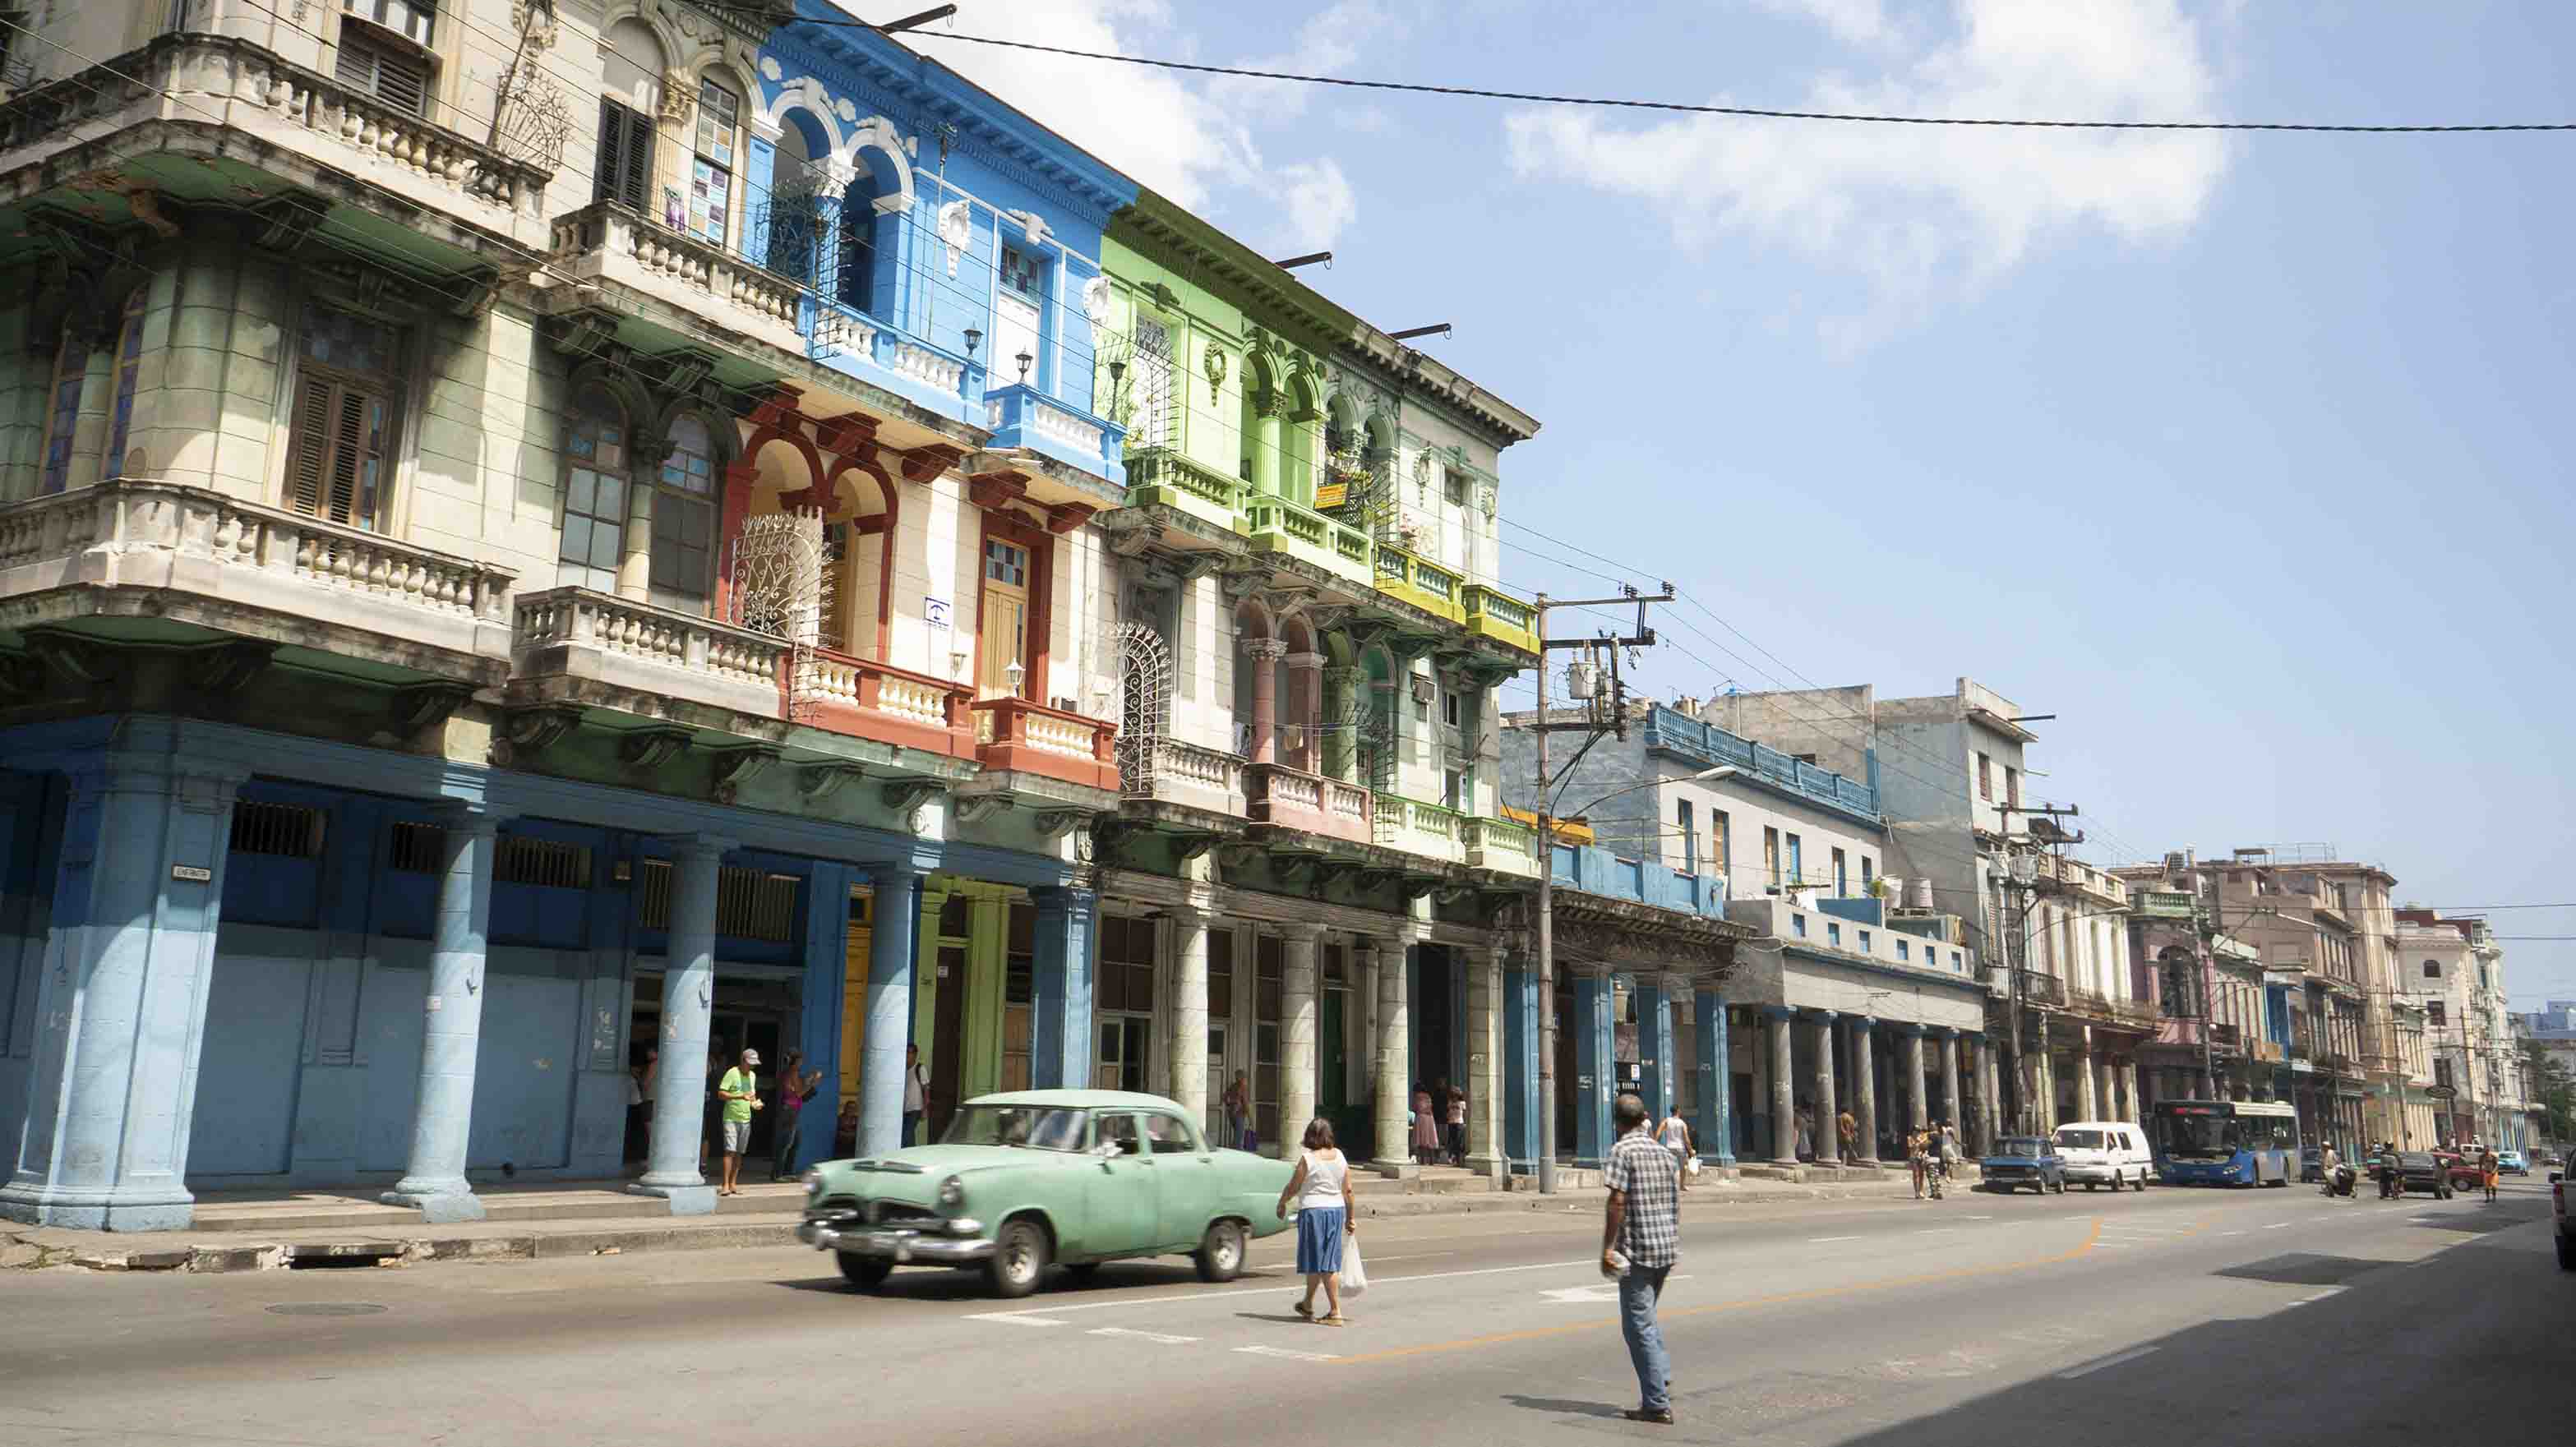 Cuba likely prompts specific imagery in the minds of internationals; classic cars driving past Spanish colonial facades and icons of Communism. 